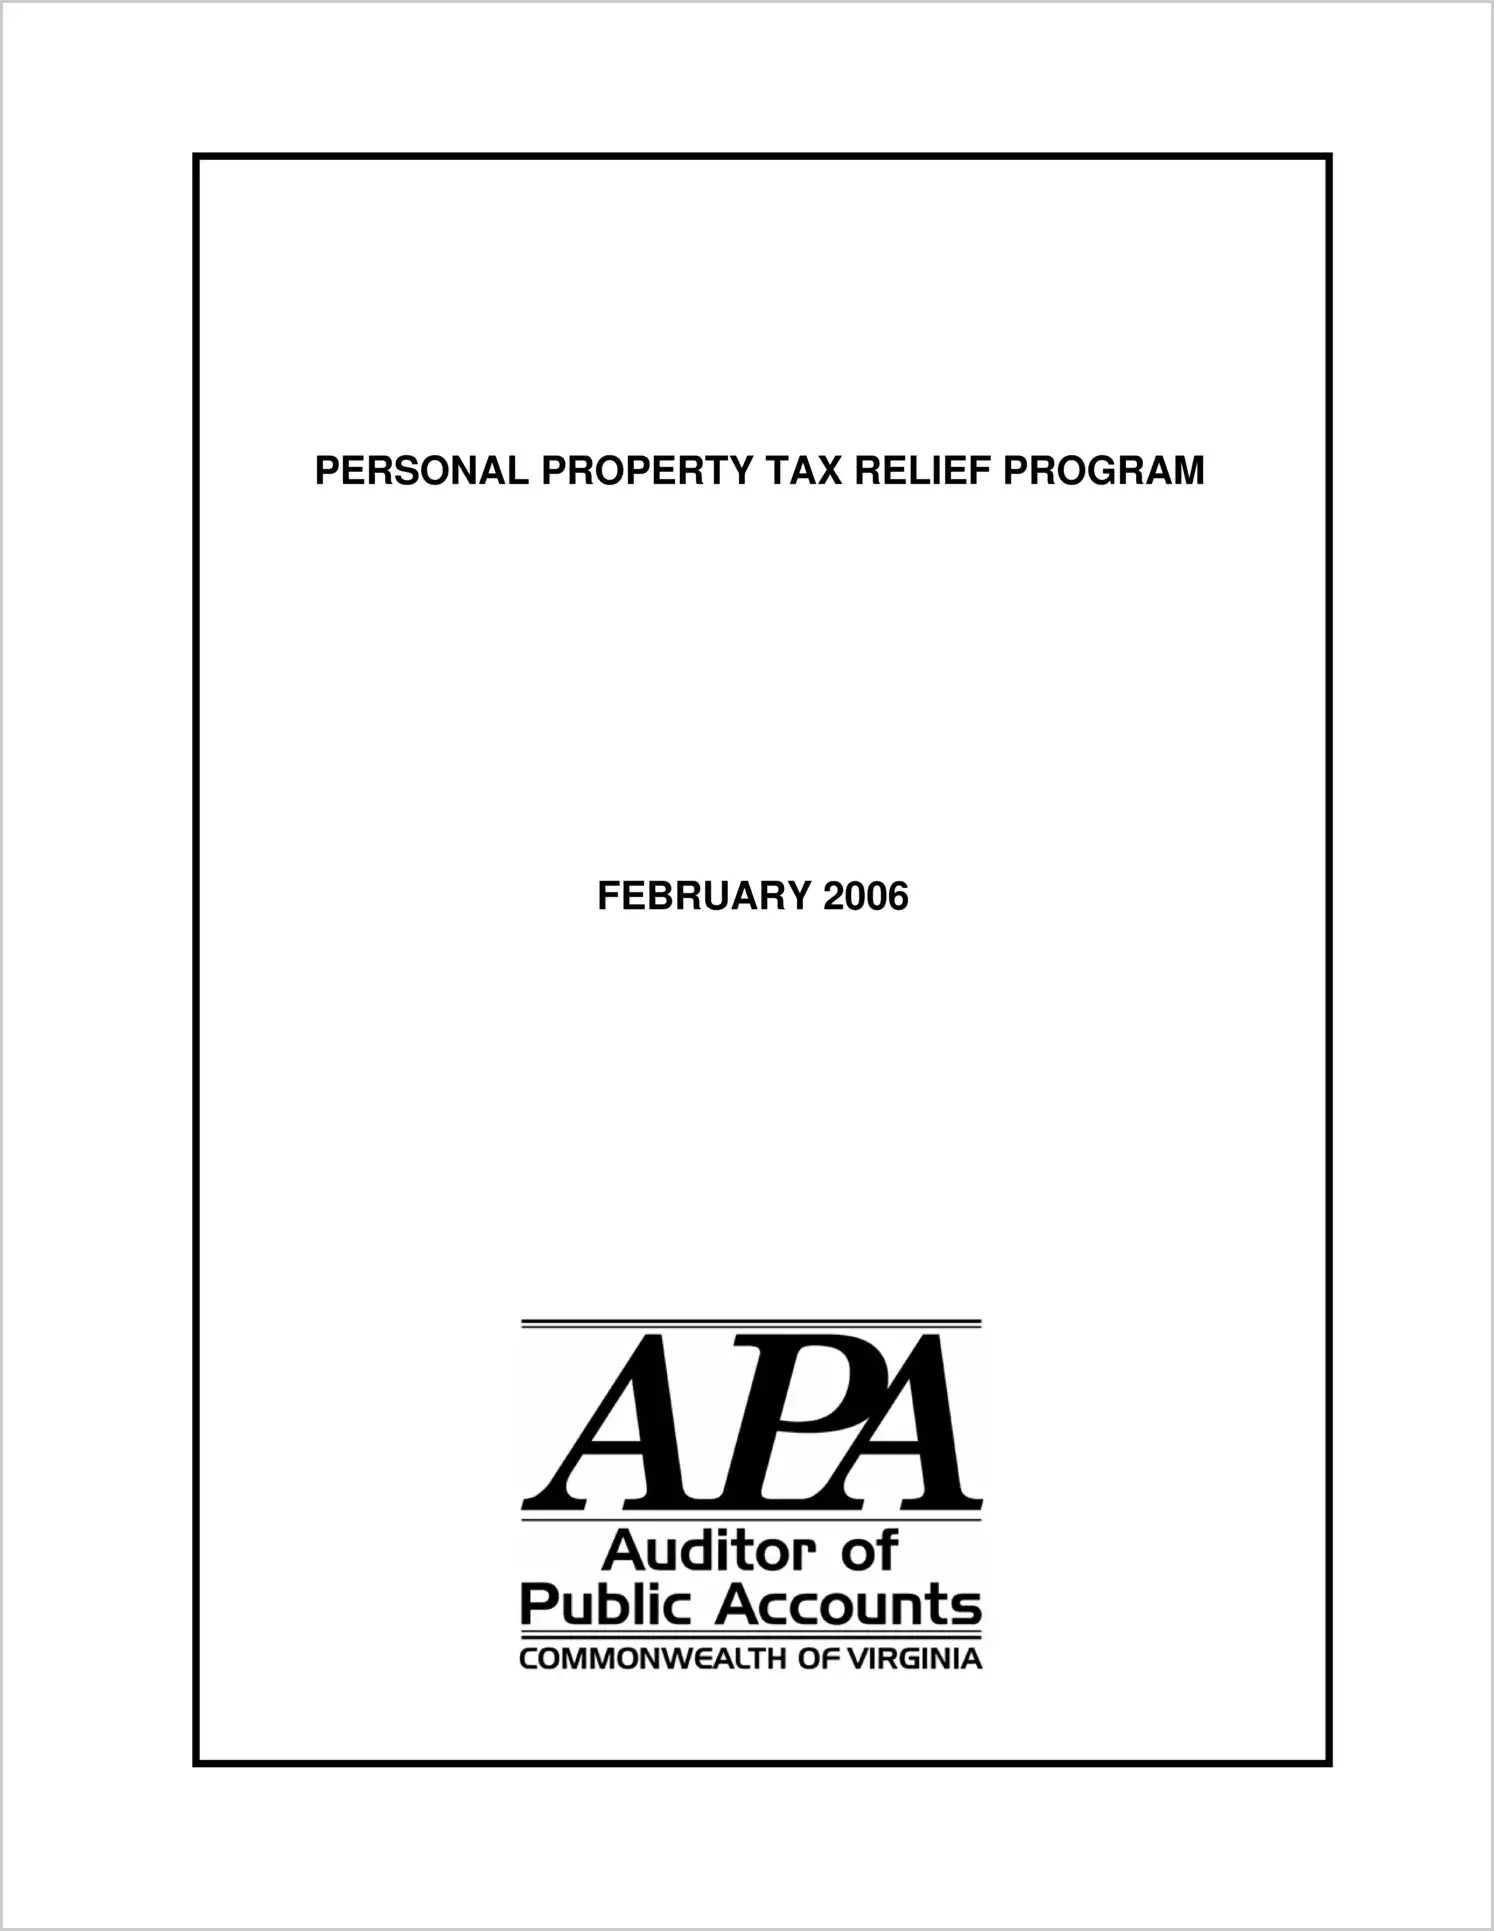 Personal Property Tax Relief Program - February 2006